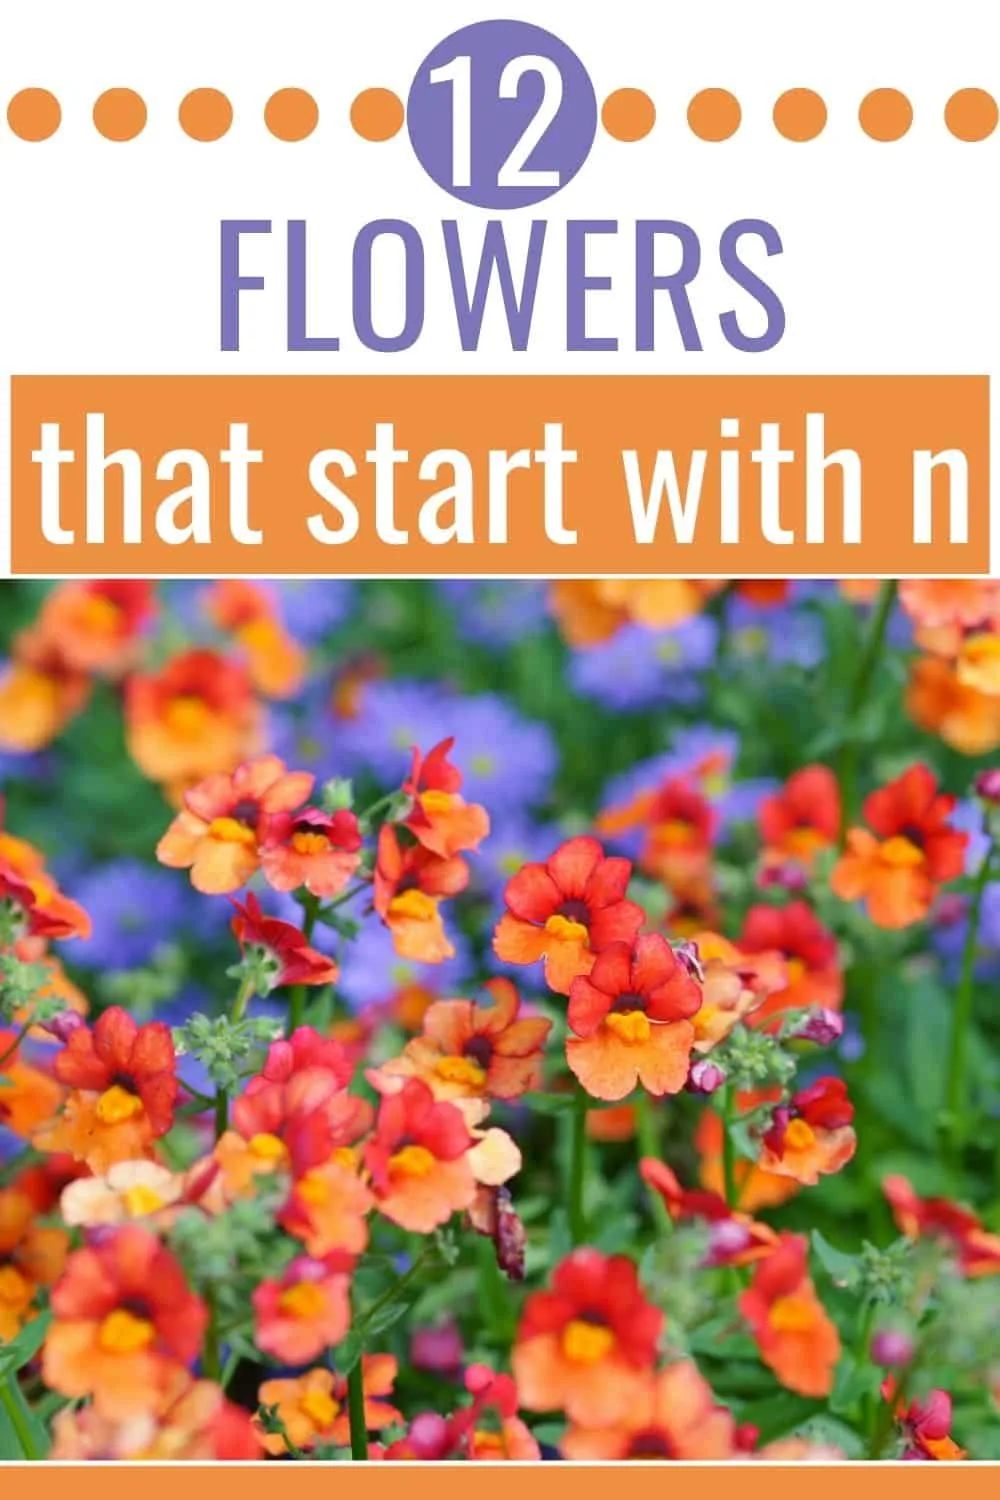 12 flowers that start with n